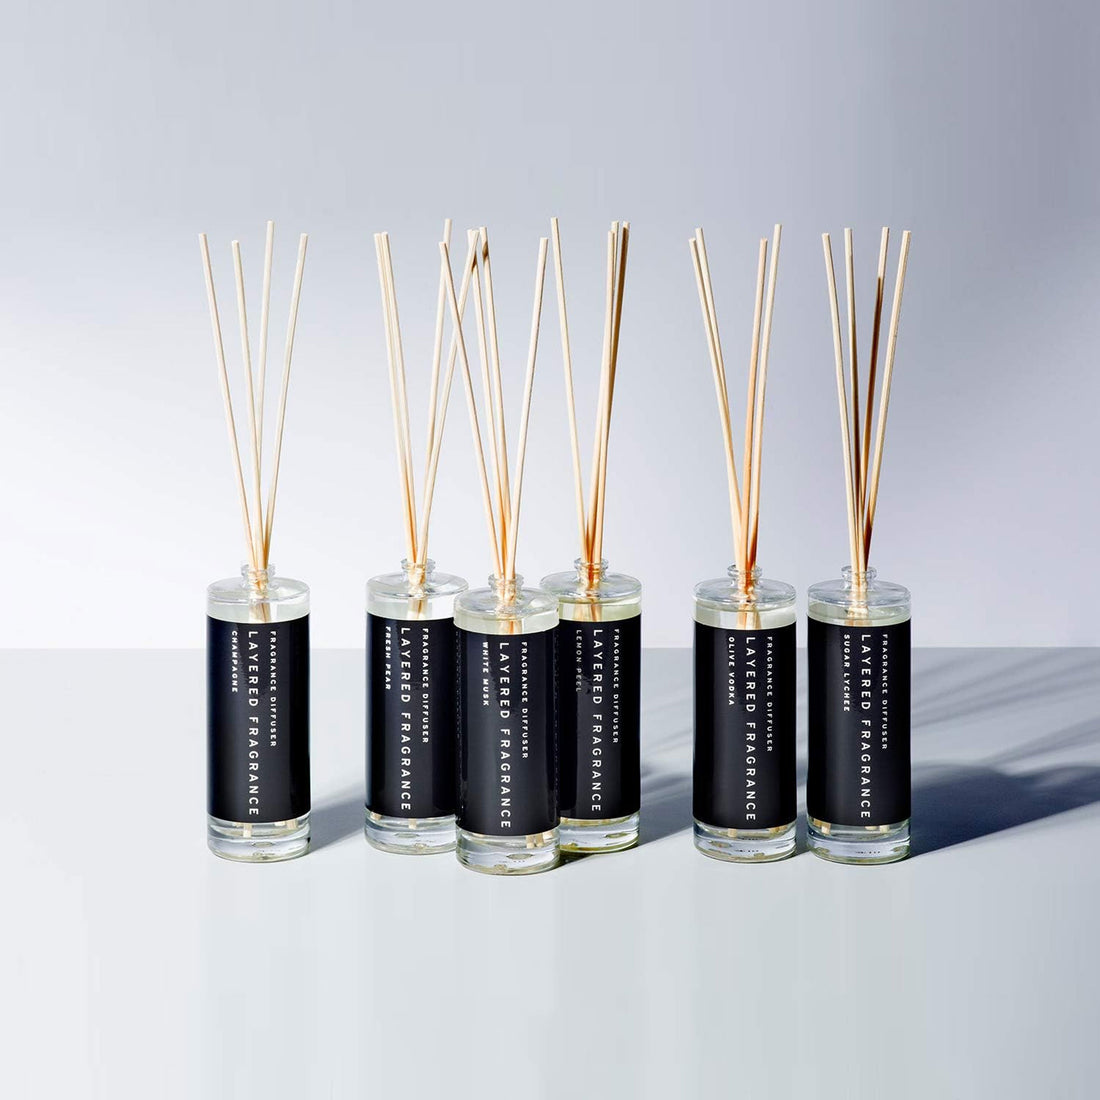 LAYERED FRAGRANCE Reed Diffuser 100ml